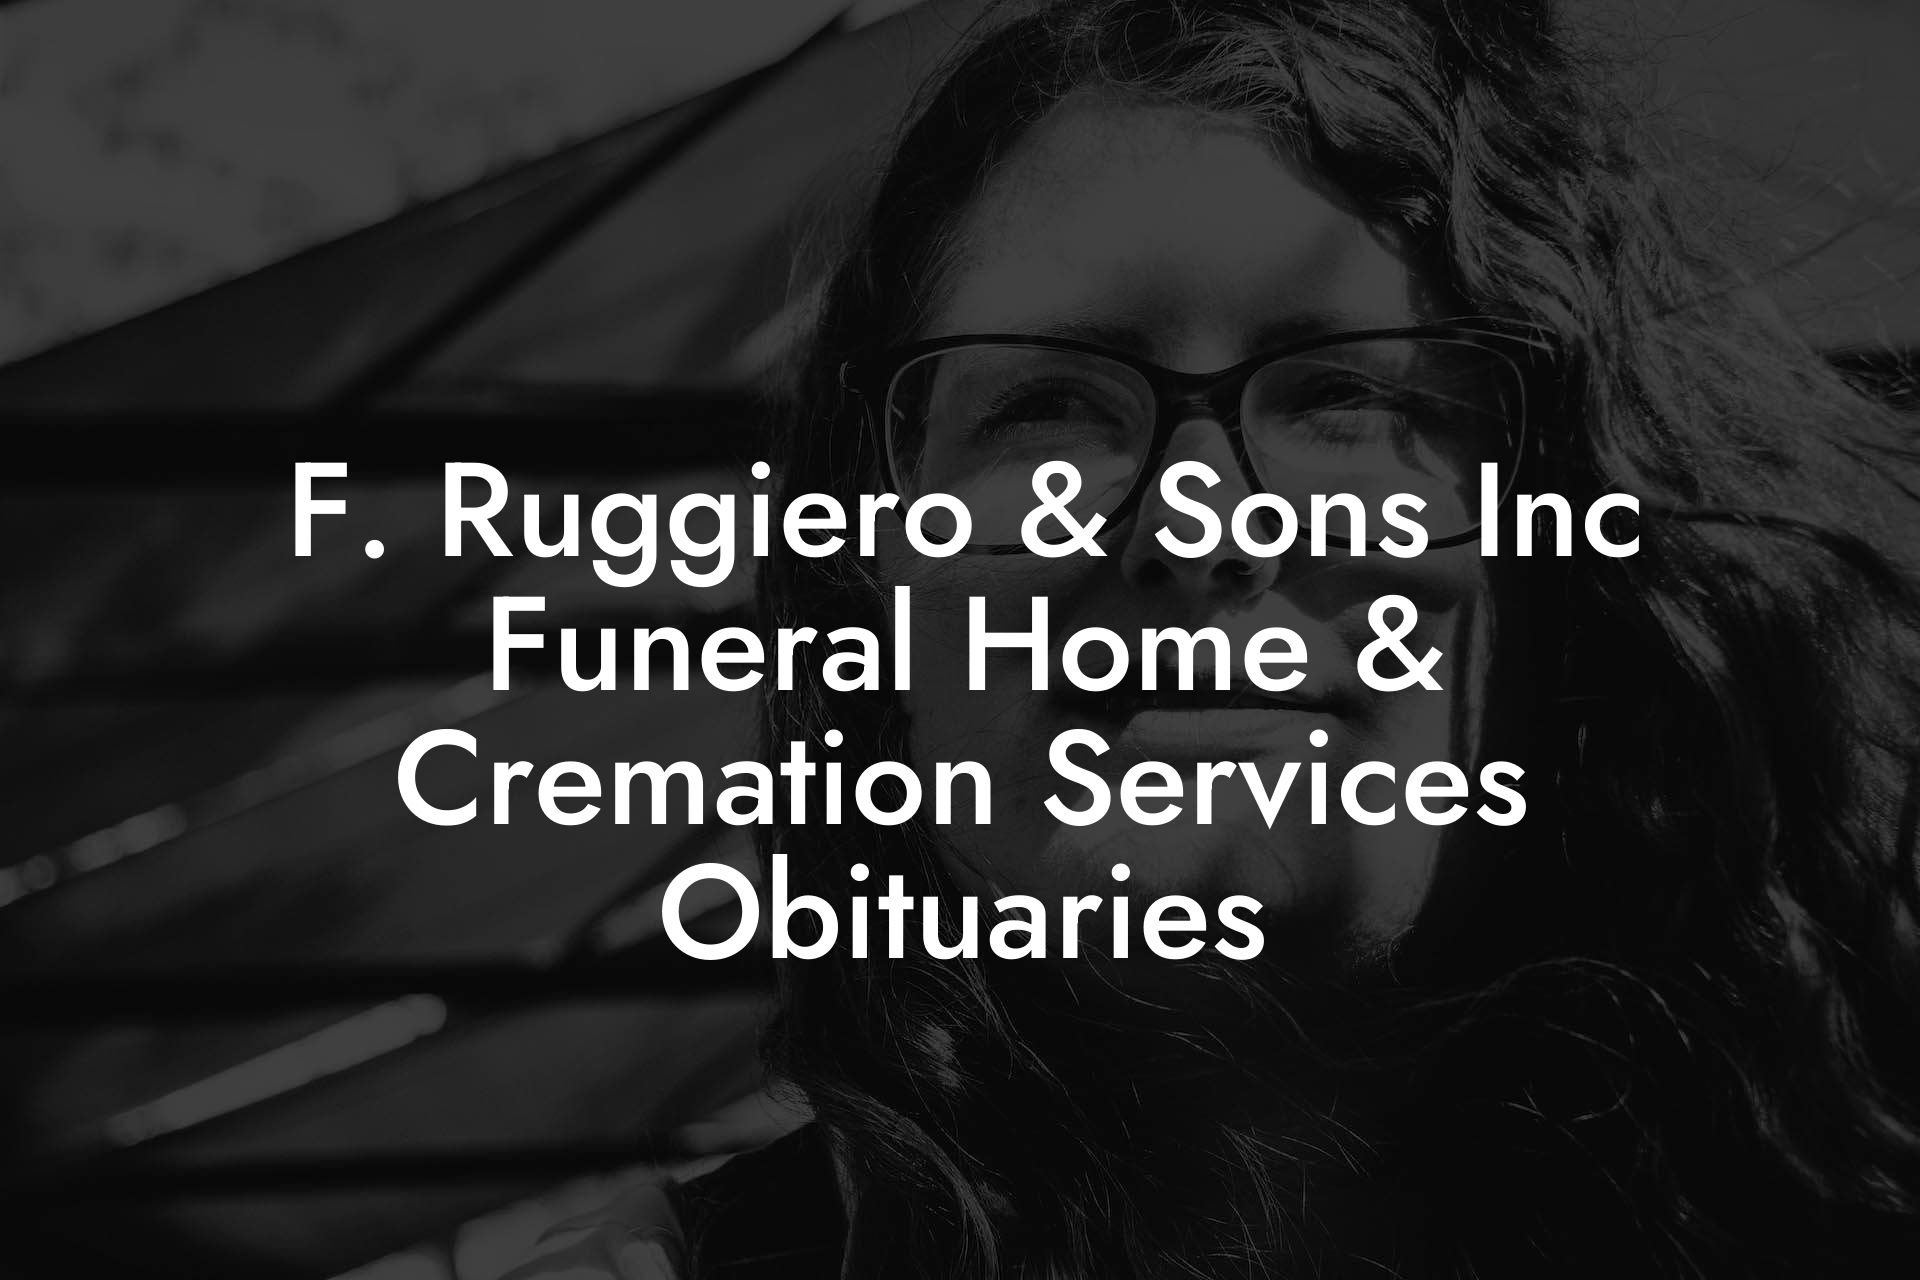 F. Ruggiero & Sons Inc Funeral Home & Cremation Services Obituaries